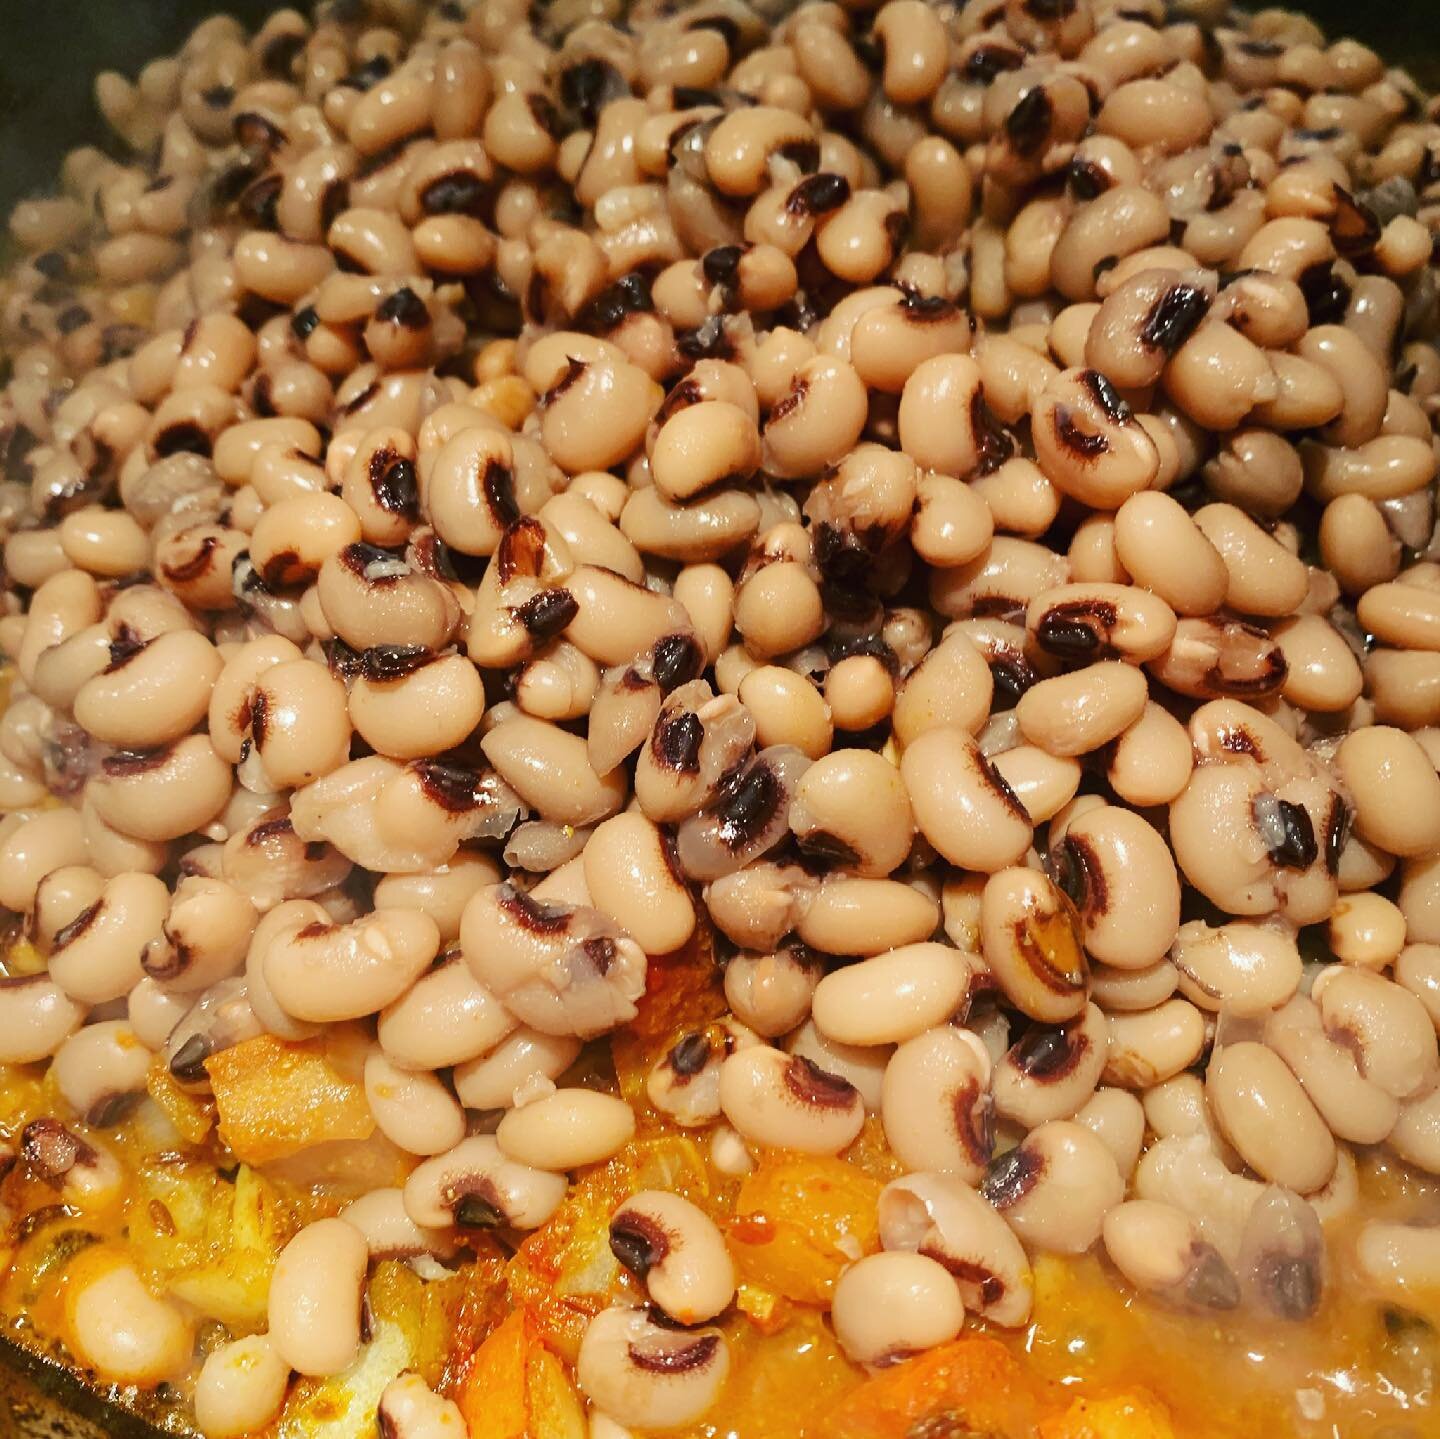 Today&rsquo;s special: Lobia aka black eye beans. #currysutra #food #homecooked #ChefLife #Chef #Foodie #spices #personalchef #indianfood #learntocook #cooking #chefteena #quaranteena #ExploreCulinaryArts #Foodie #foodpics #foodporn #chefteena #cooki